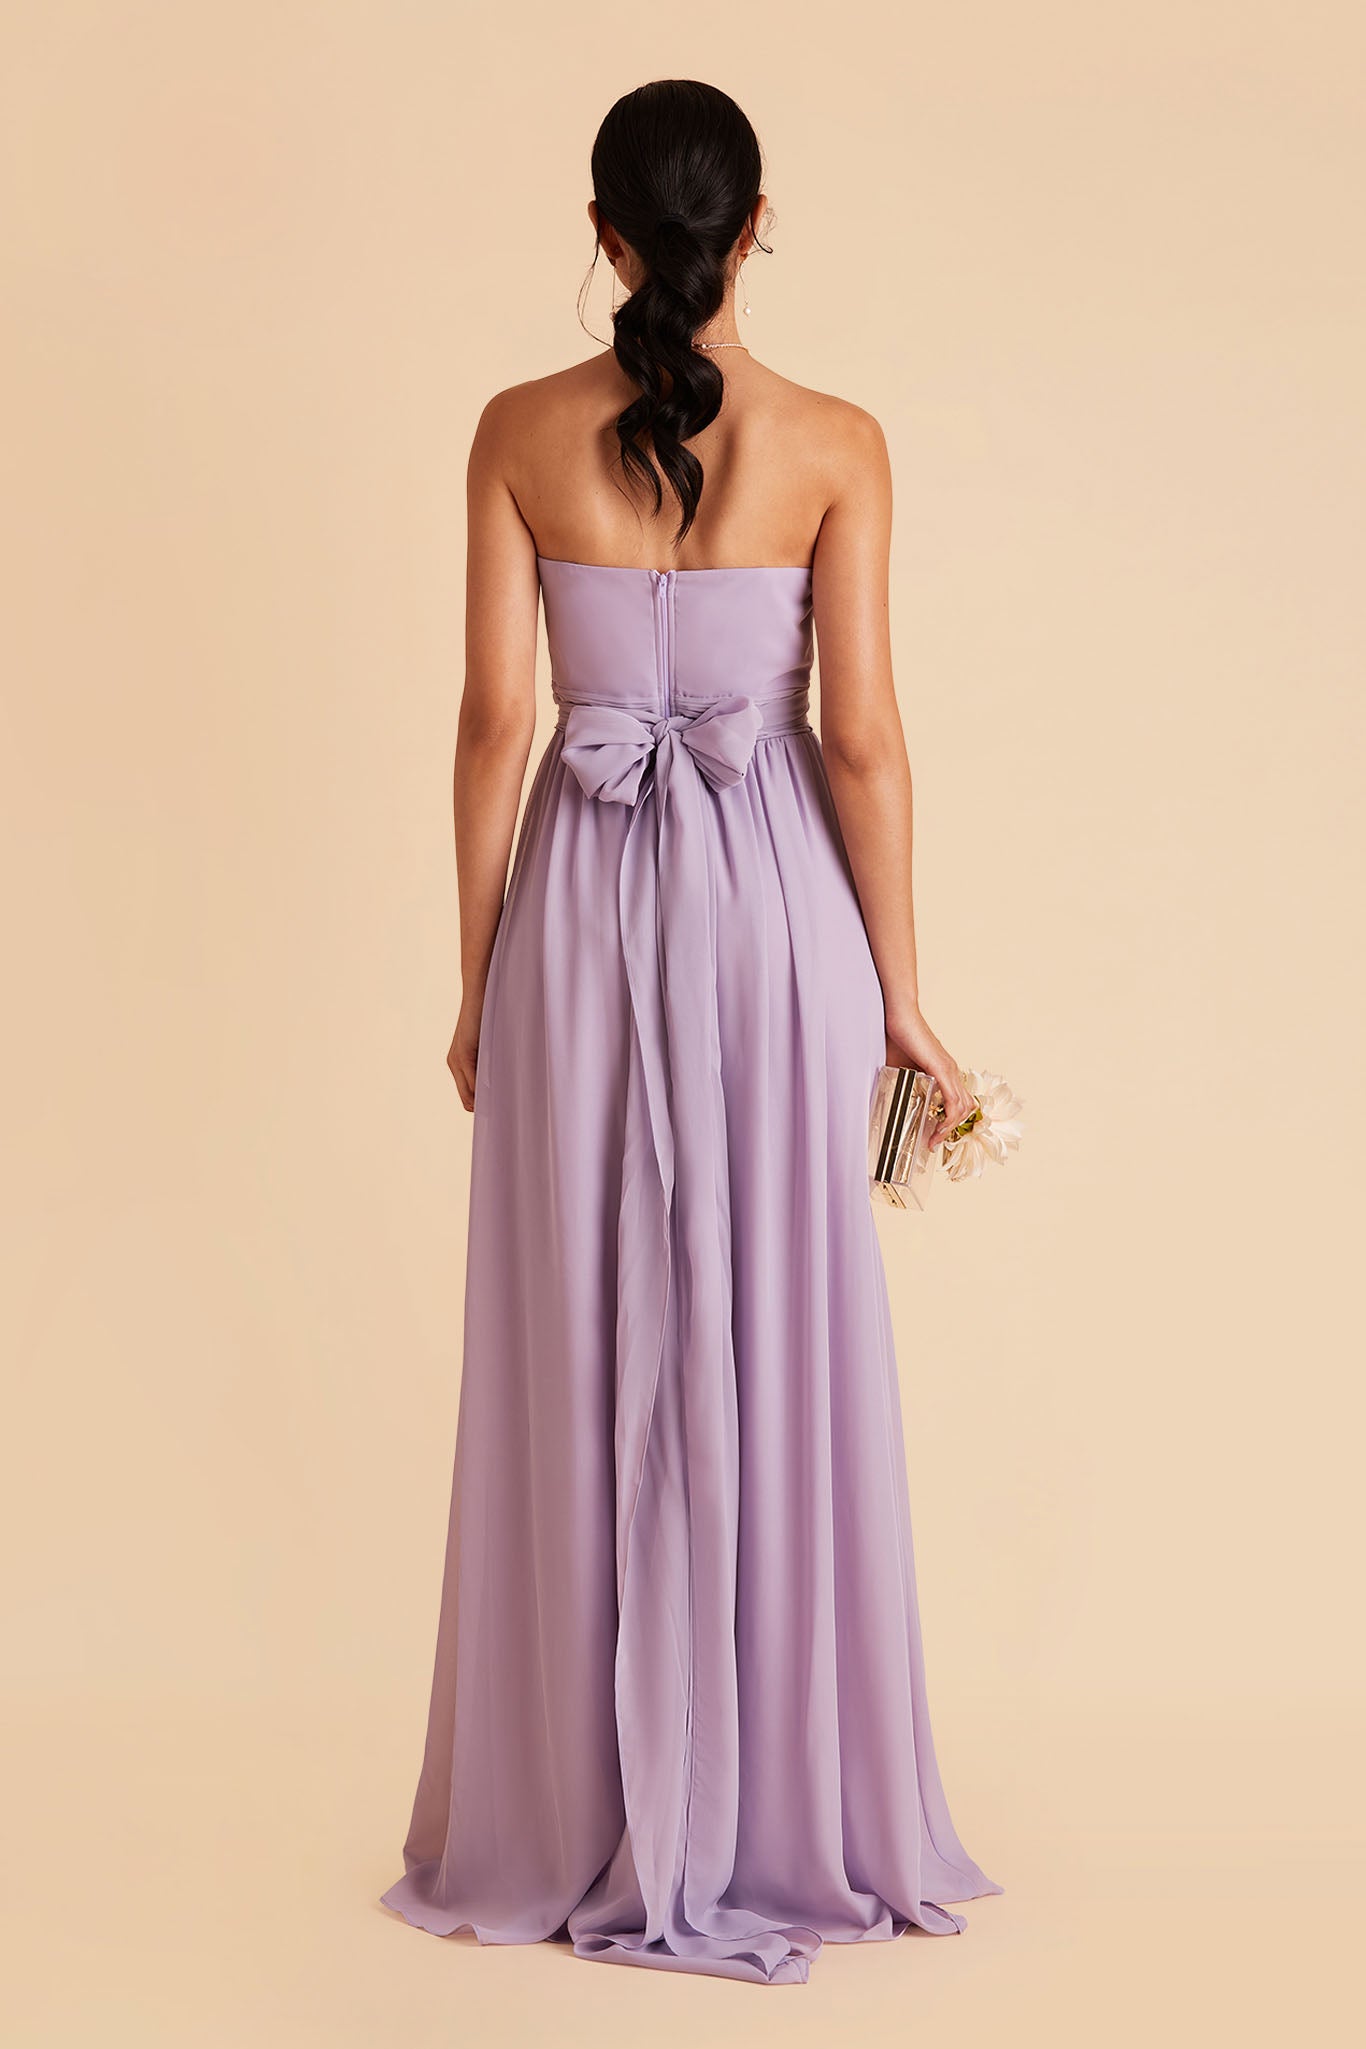 Grace convertible bridesmaid dress in Lavender Chiffon by Birdy Grey, back view